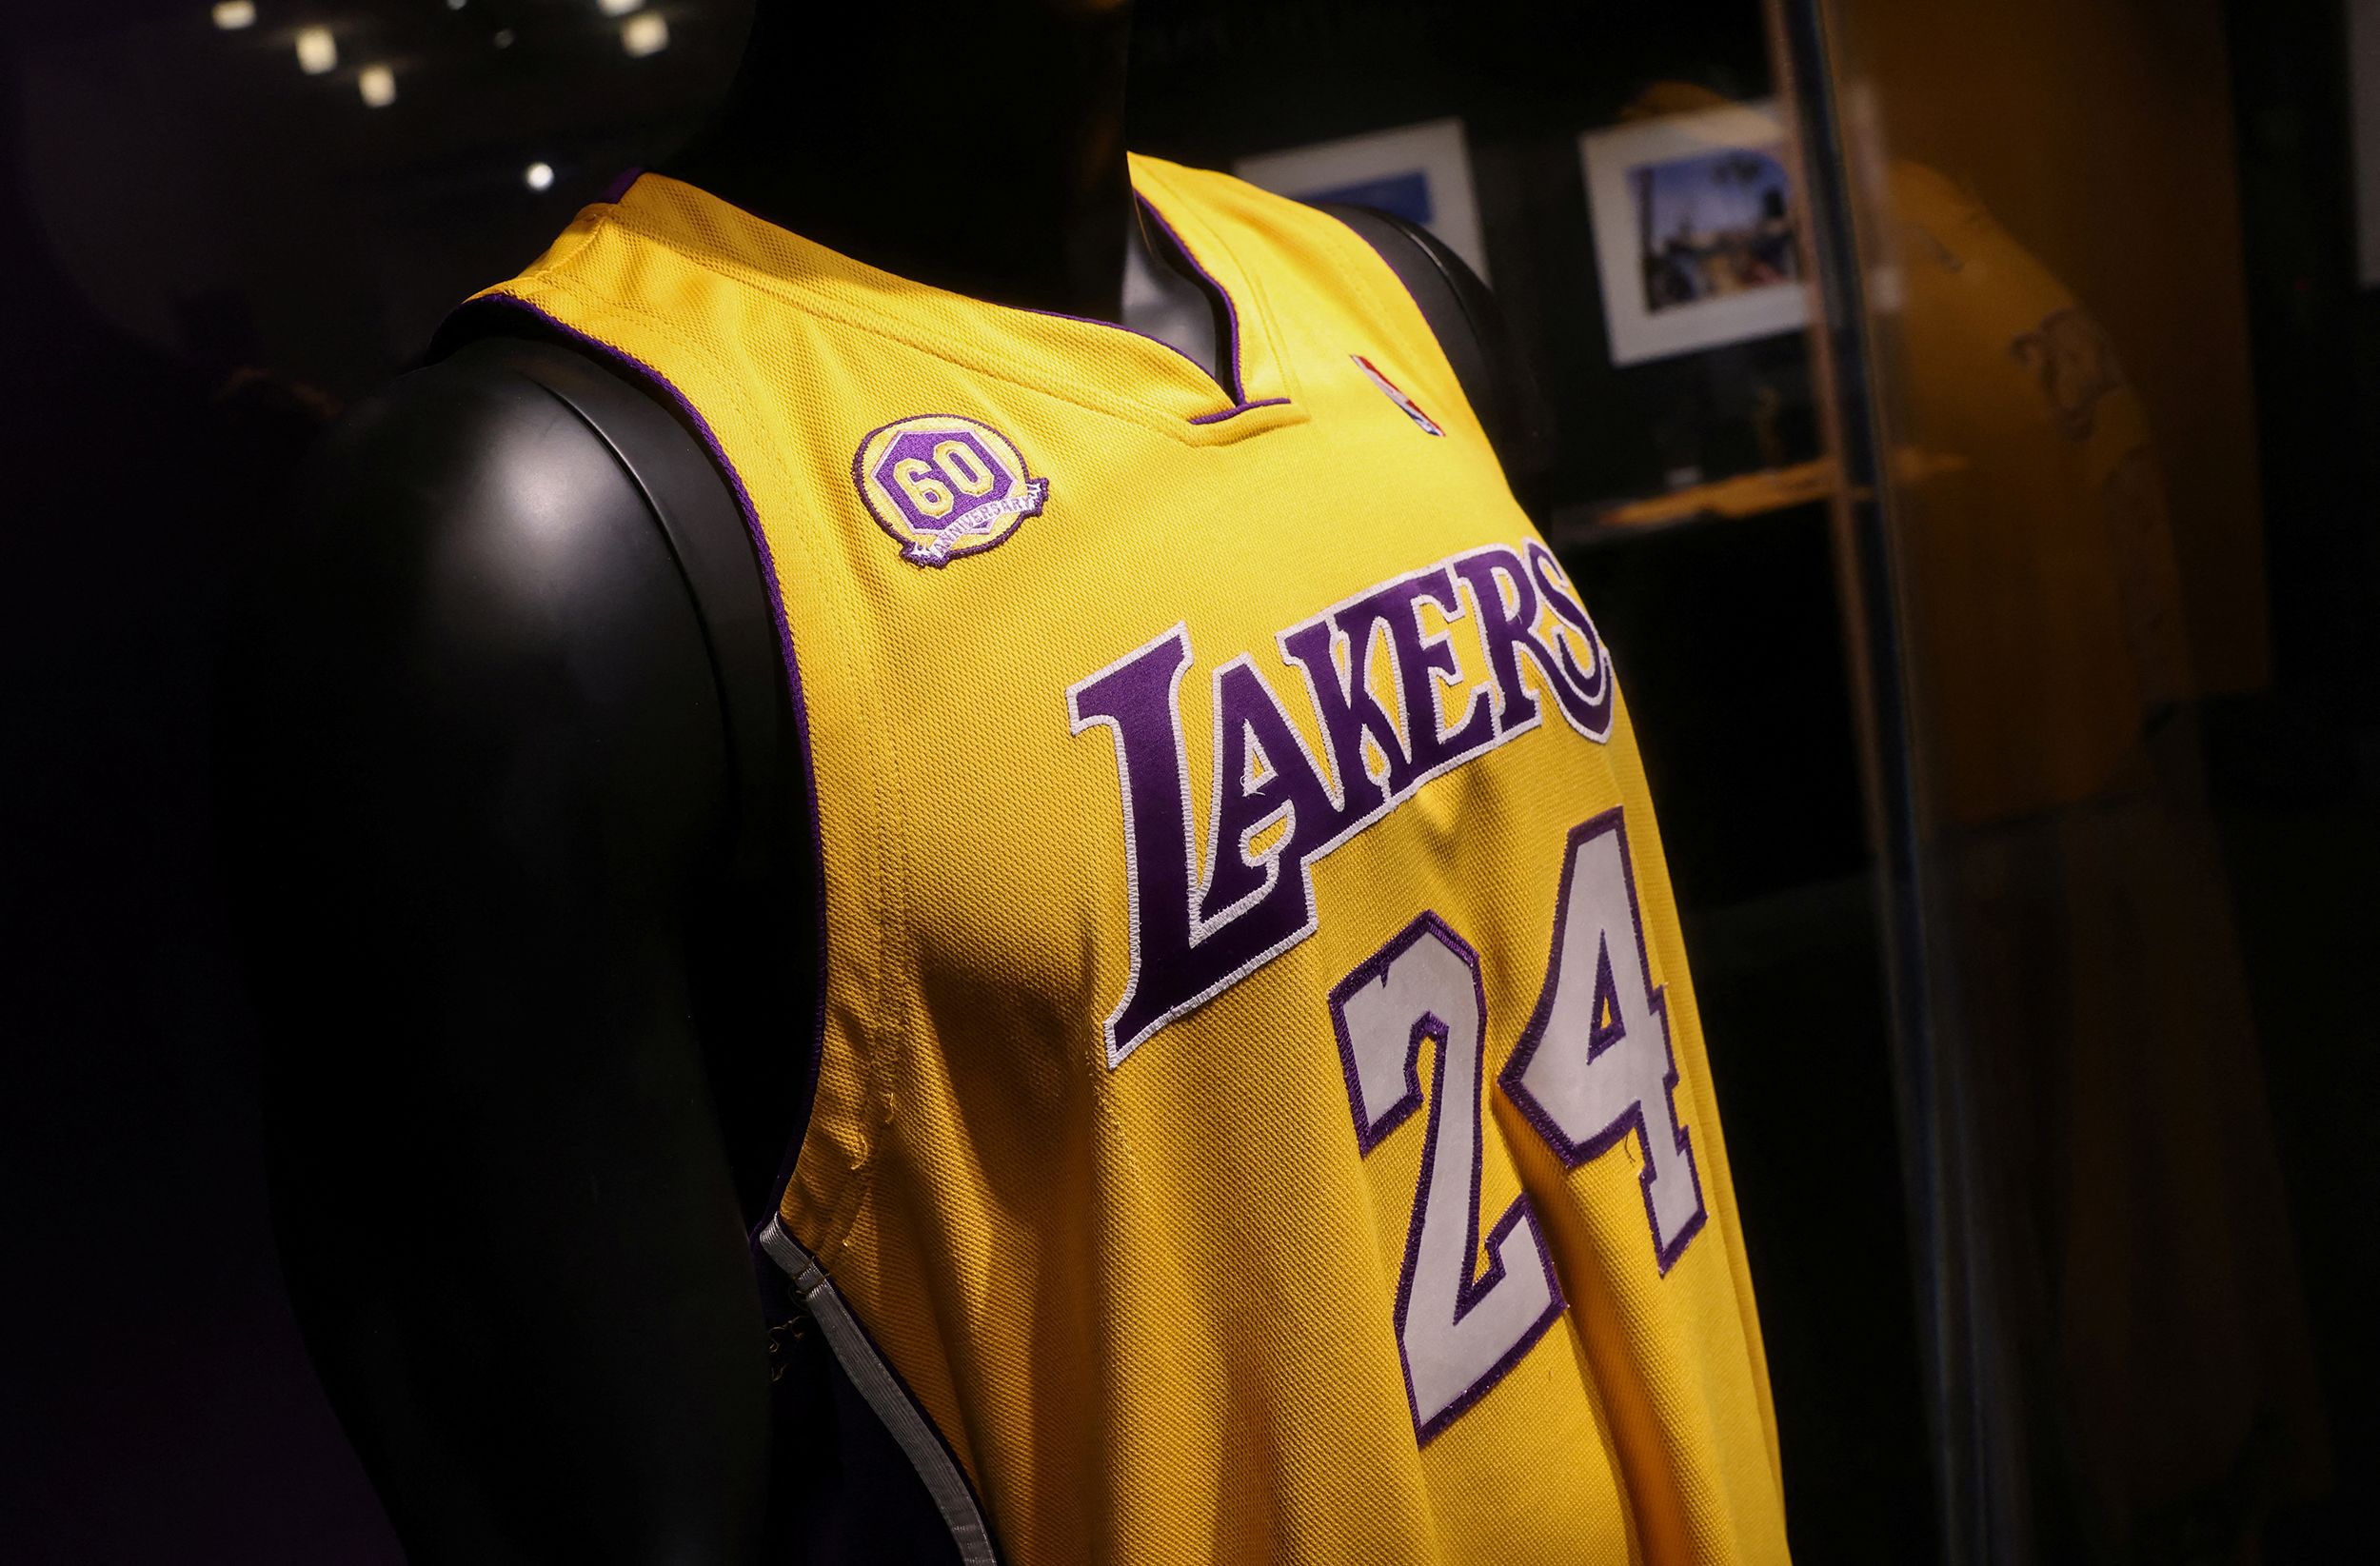 lakers city jersey 2016